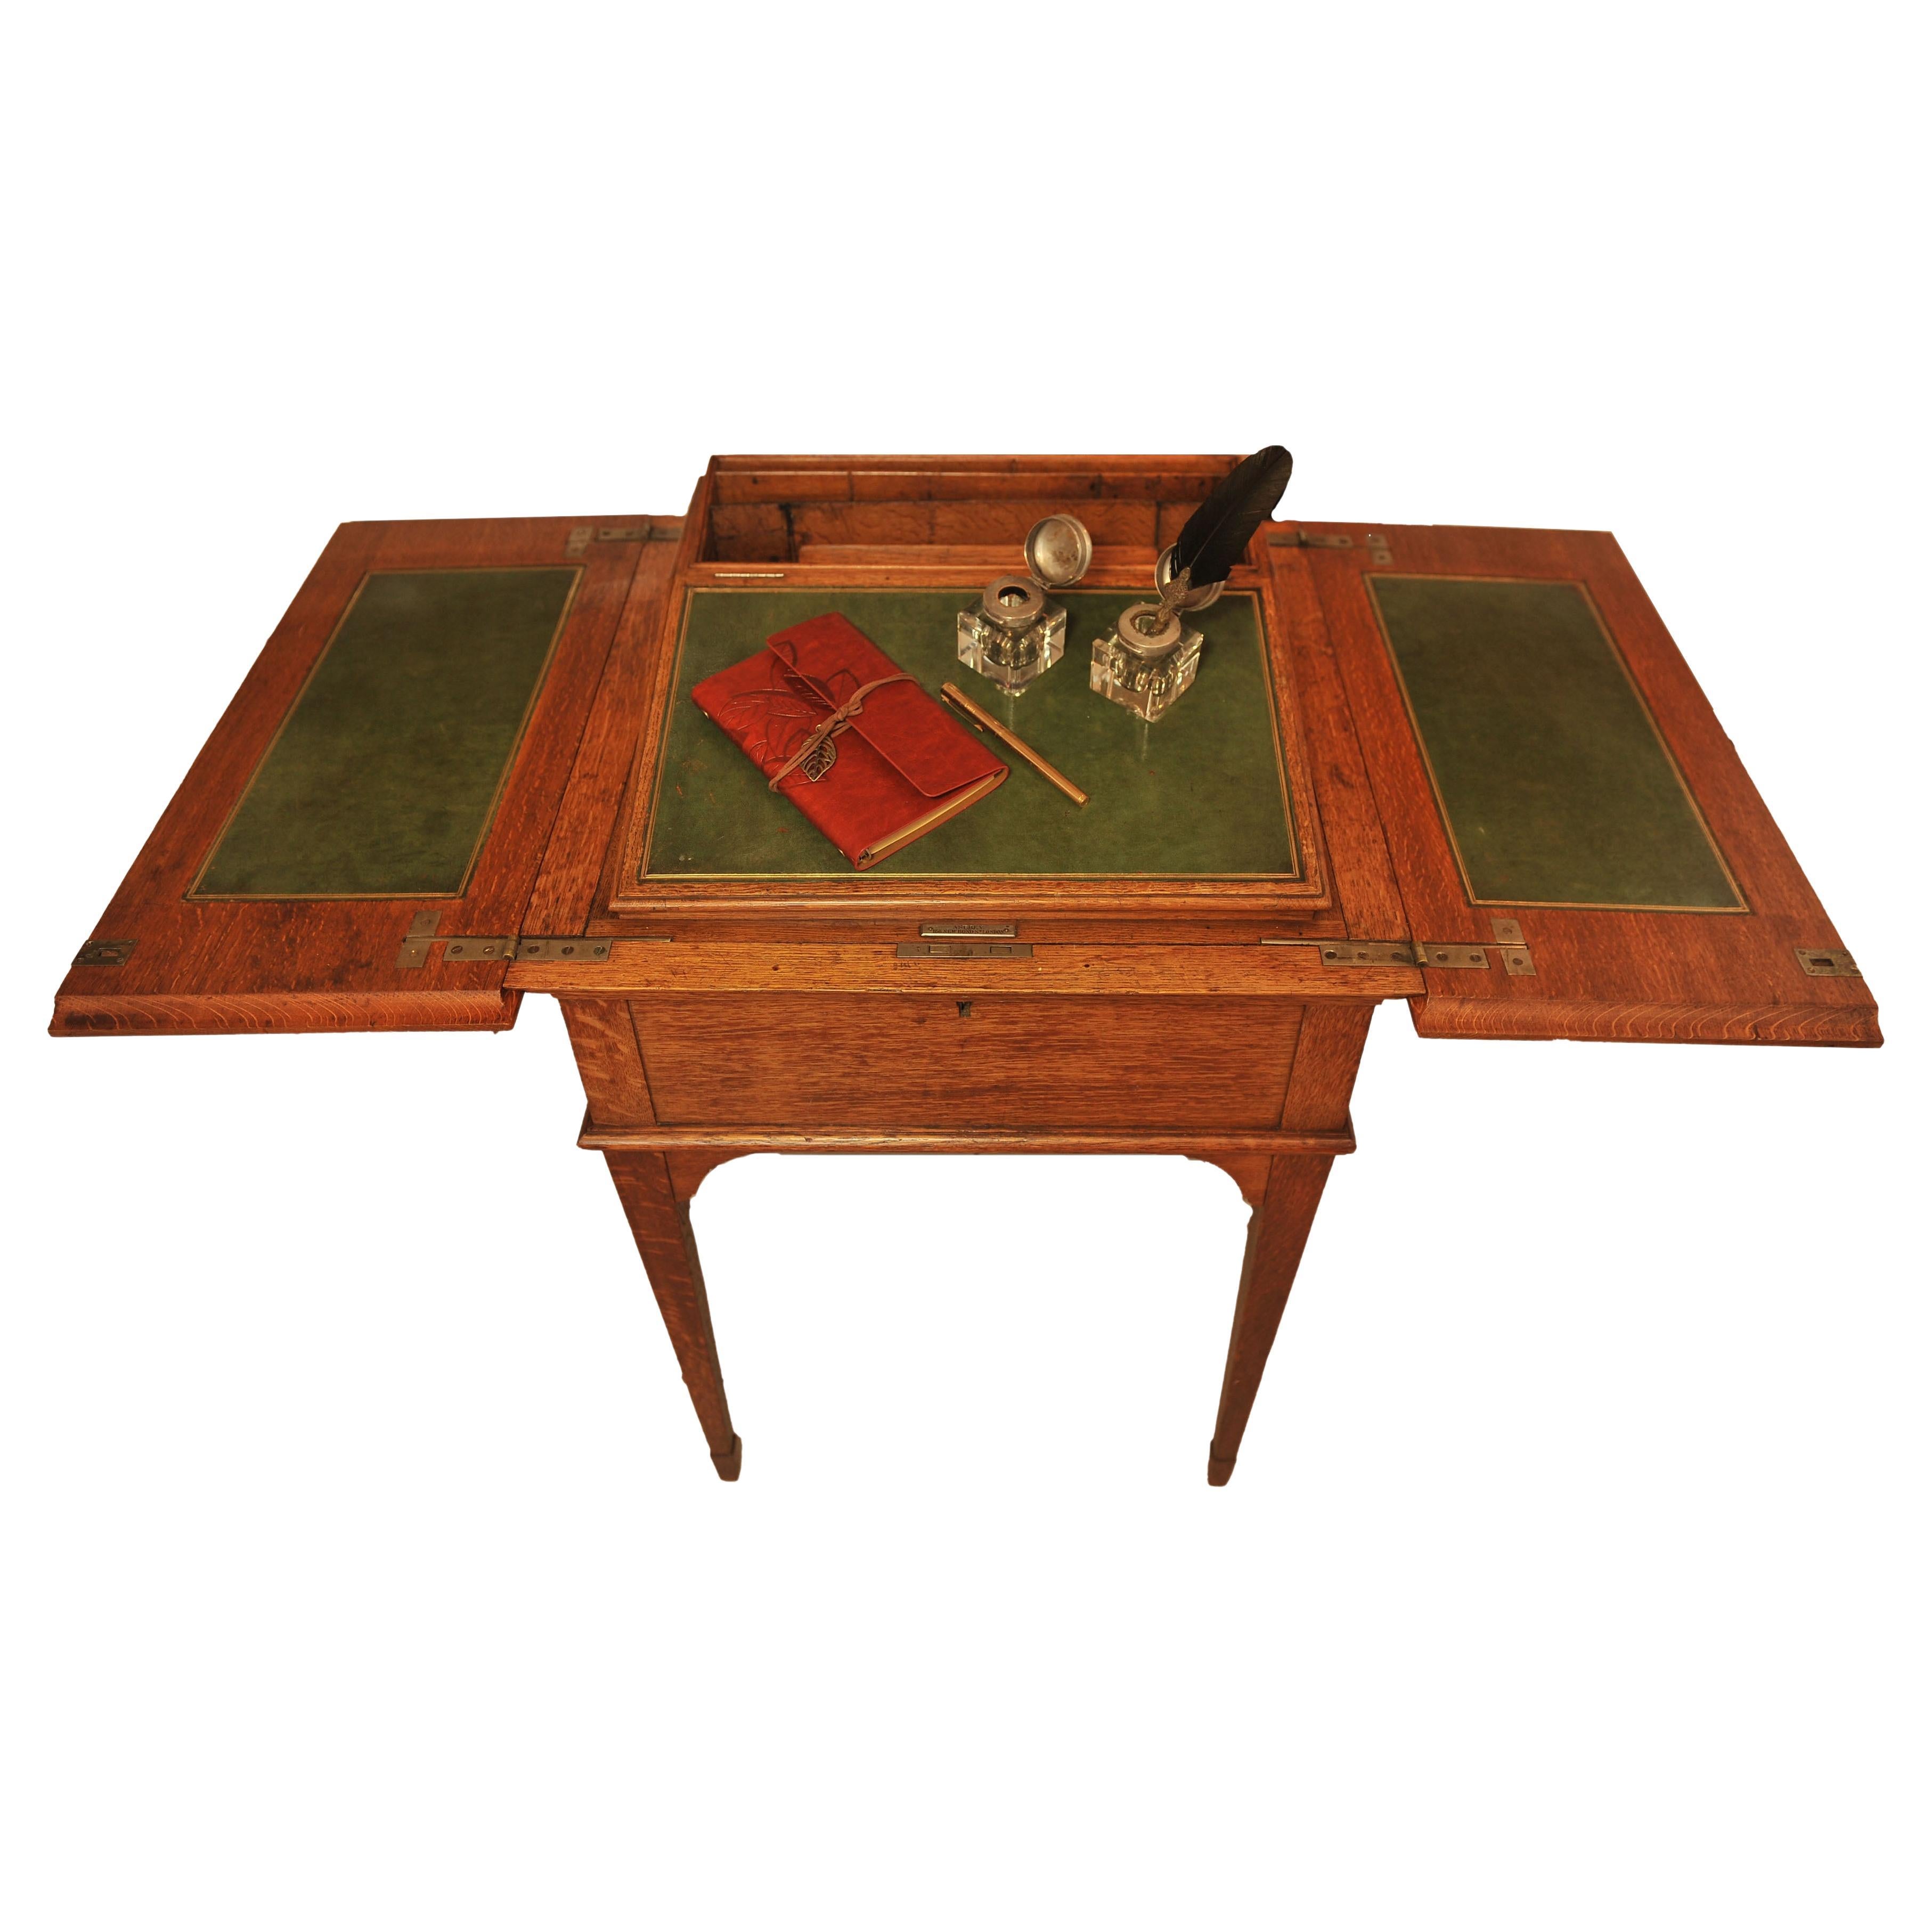 Asprey & Co. London Oak & Tooled Racing Green Leather Pop-Up Writing Desk 1920s For Sale